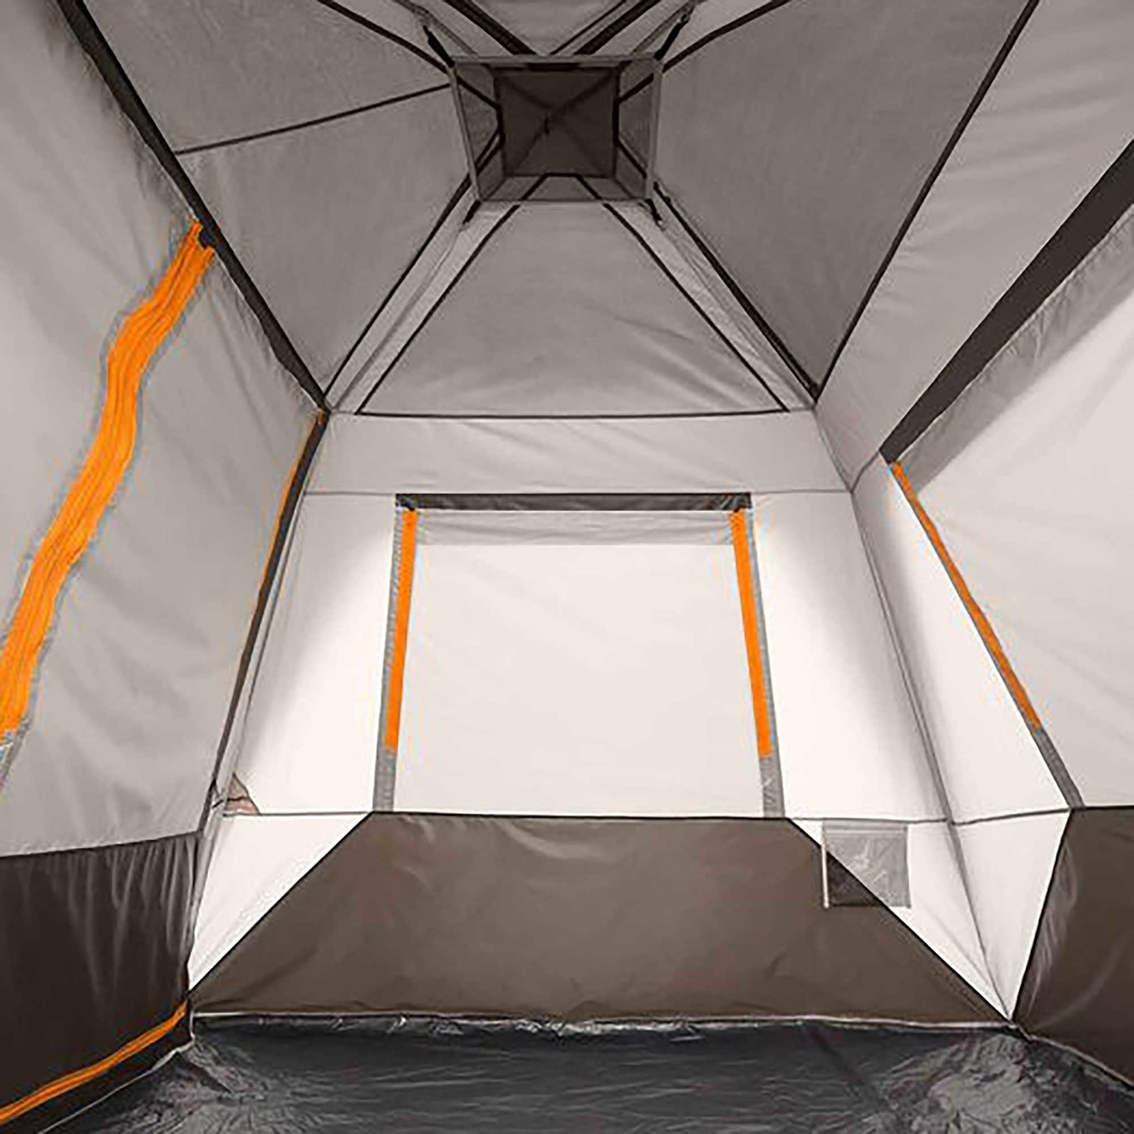 Bushnell 6 Person Outdoorsman Instant Cabin Tent - Image 6 of 6